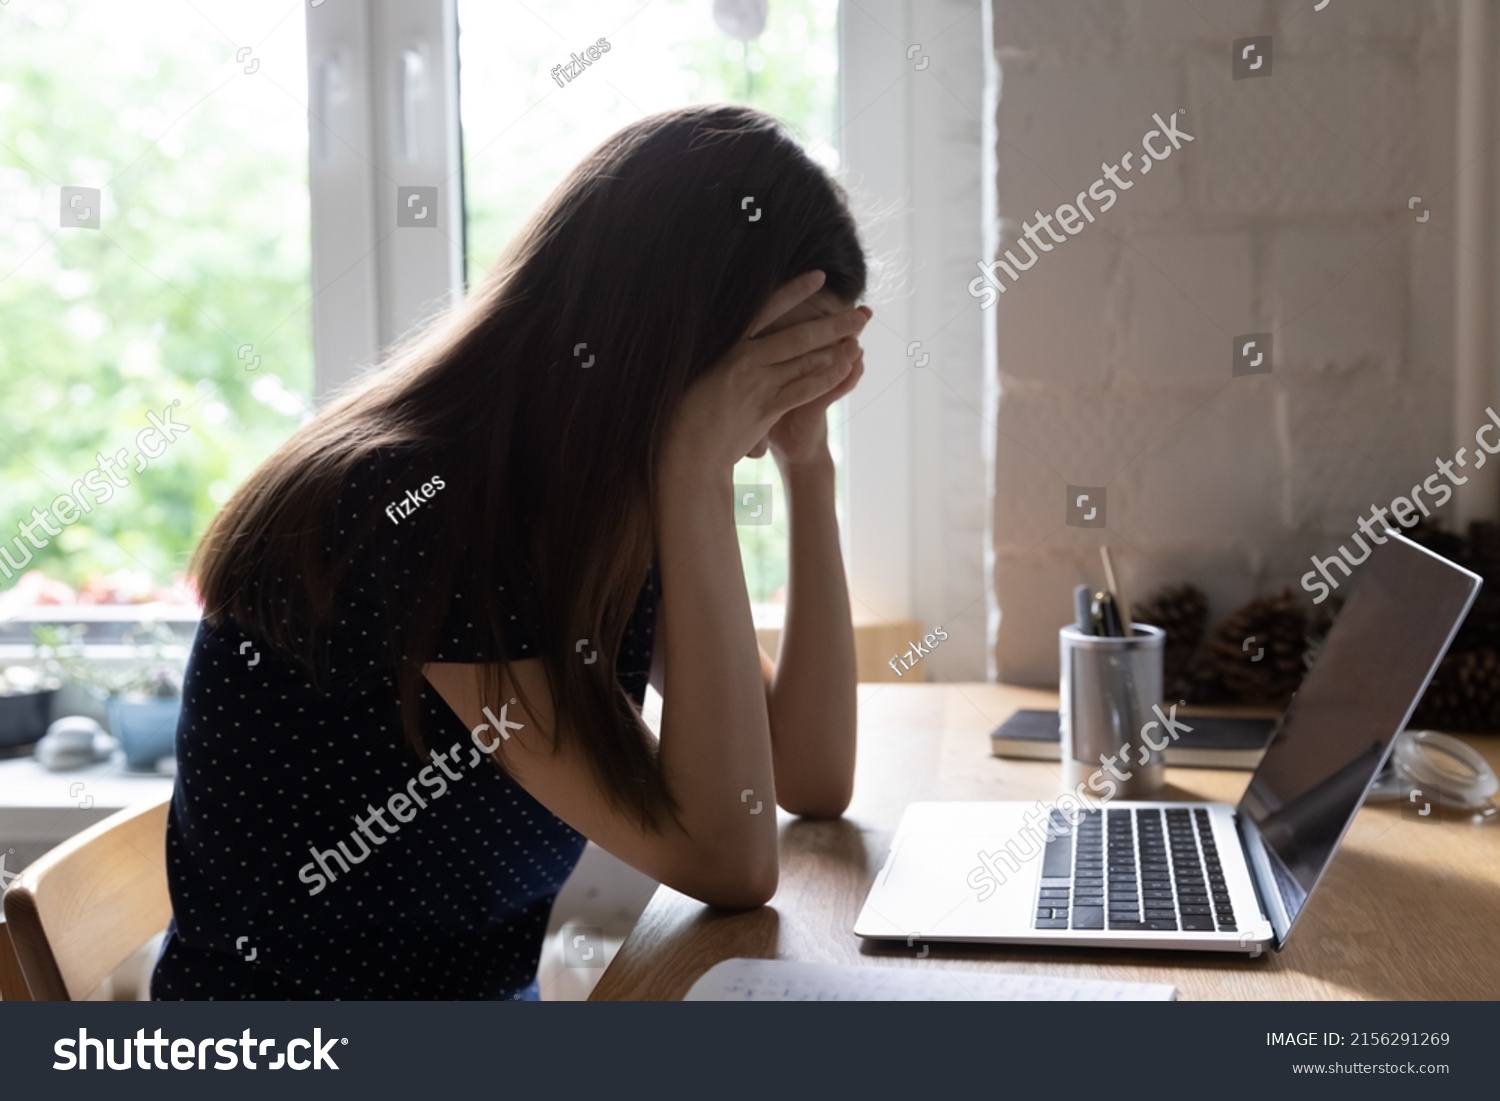 Exhausted upset young student girl sitting at table with laptop, leaning head on hand, suffering from headache, feeling depressed, unhappy, tired, getting bad news. Professional burnout concept #2156291269